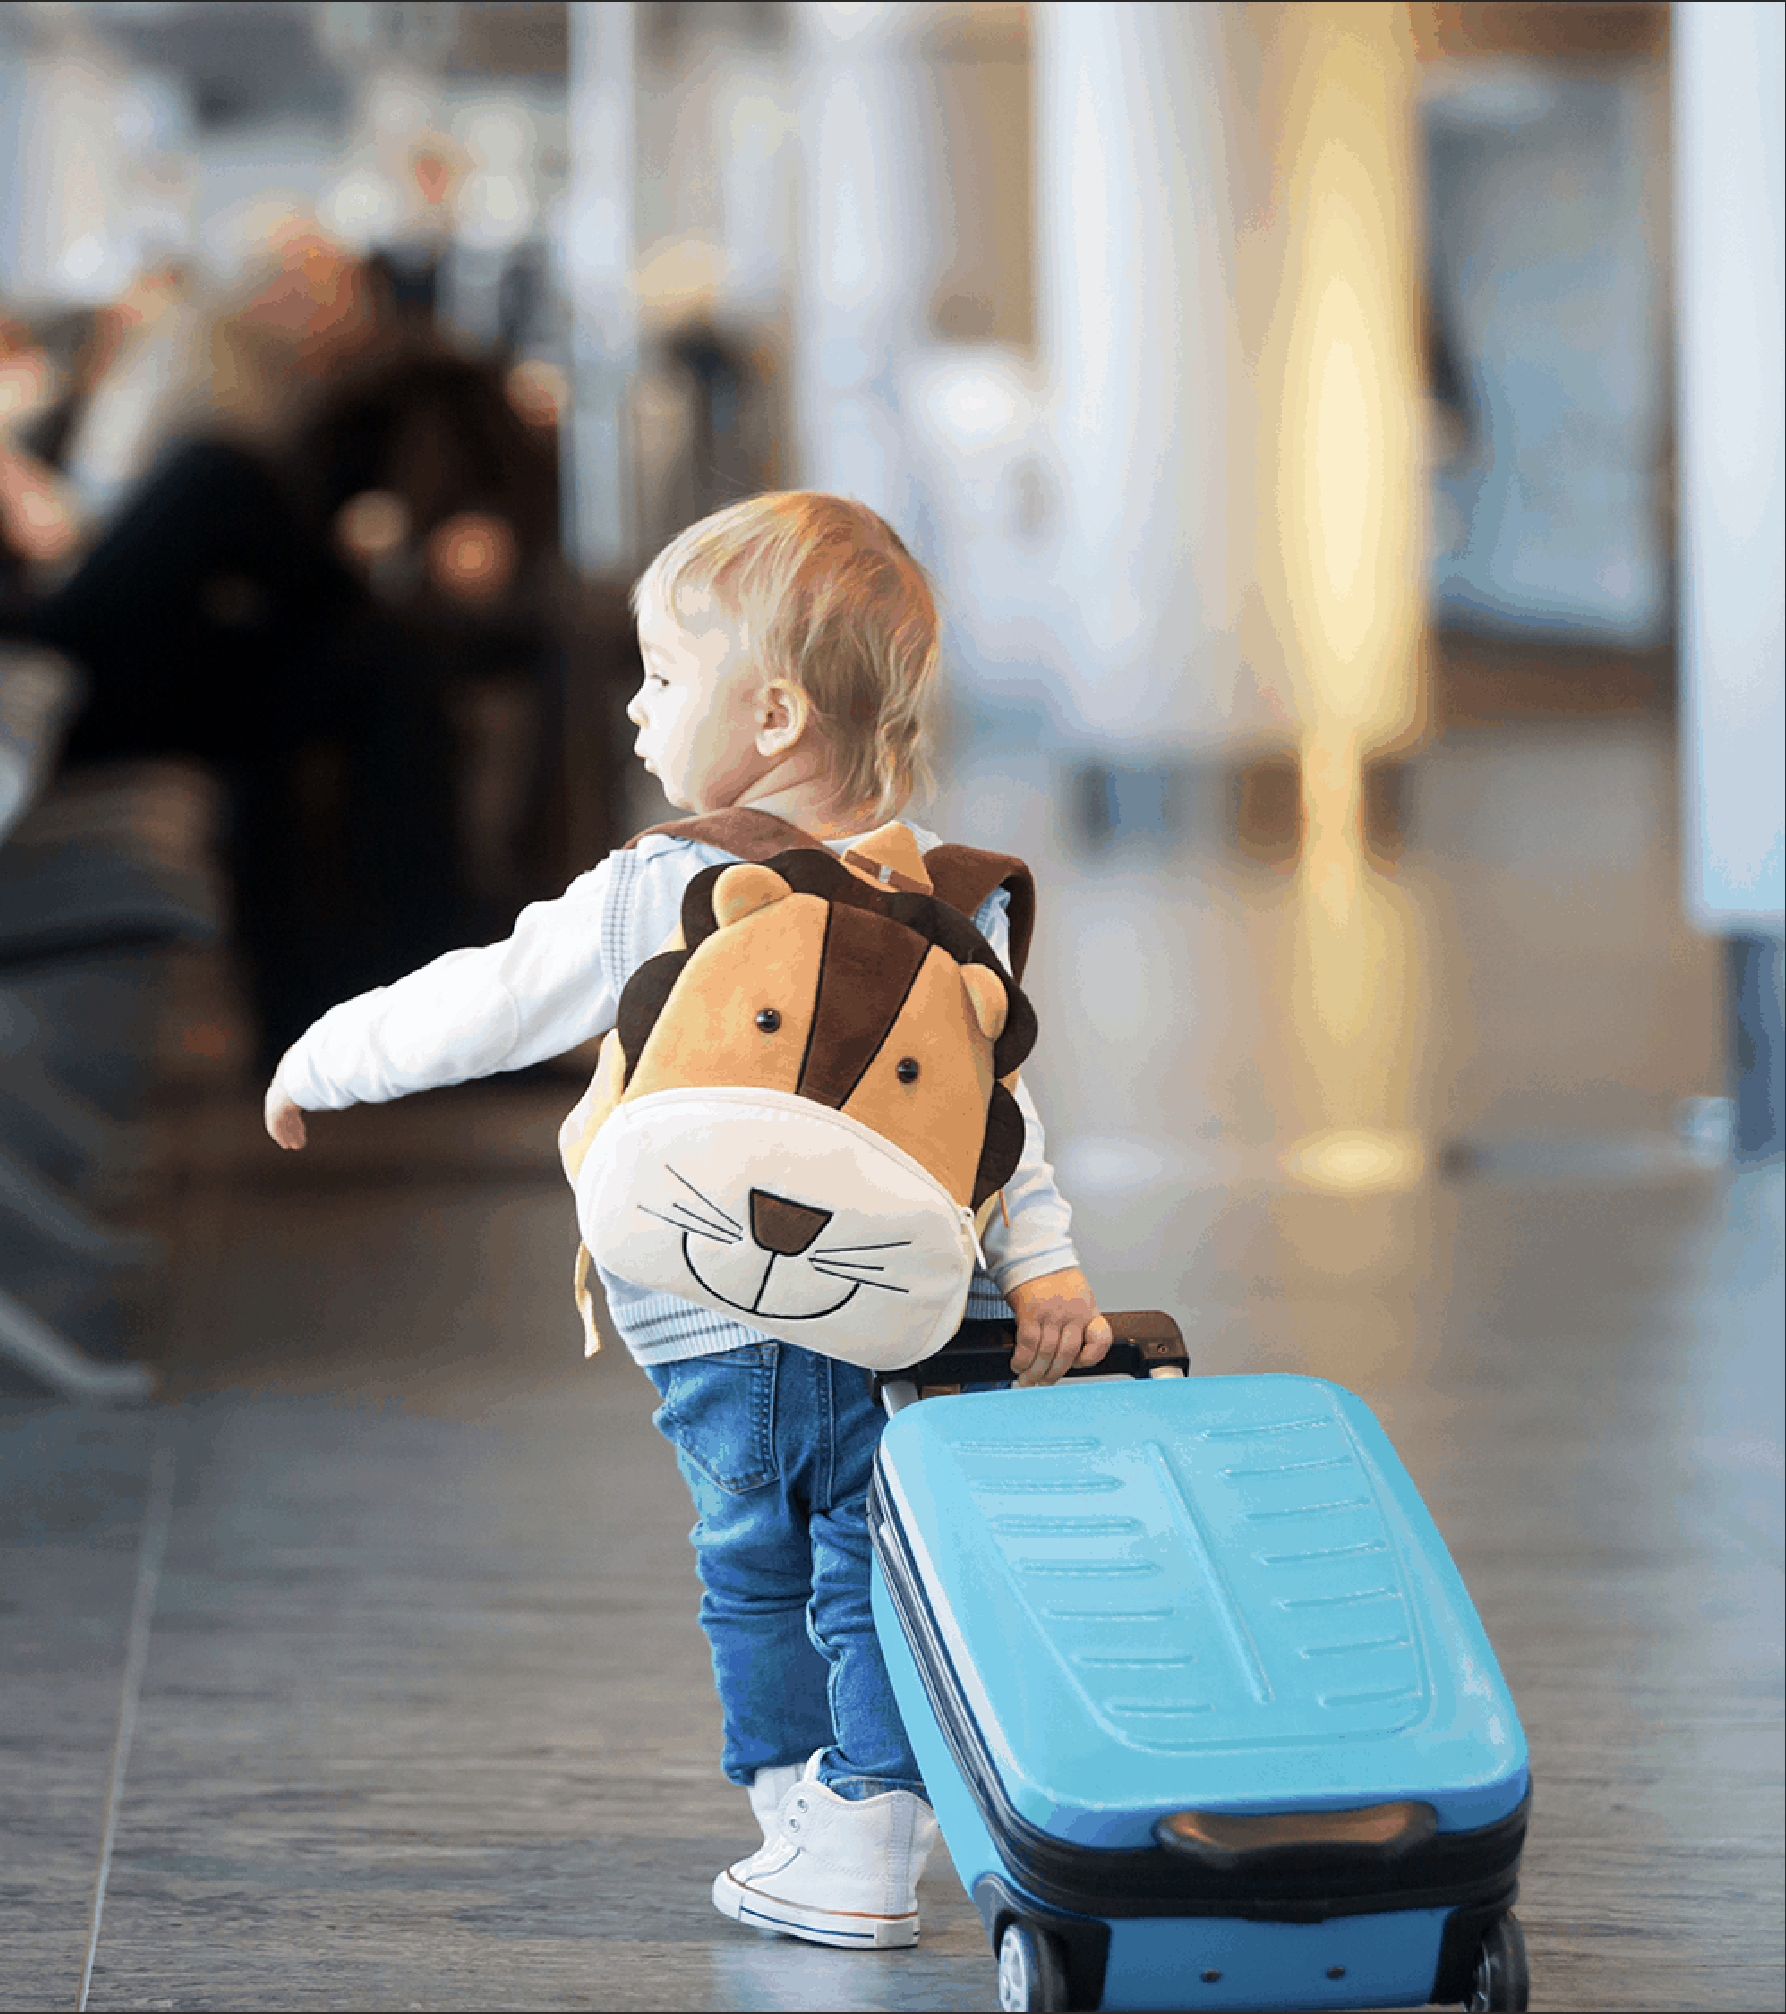 Innate-therapies-travelling-with-kids-with-anxiety-Blog-image1